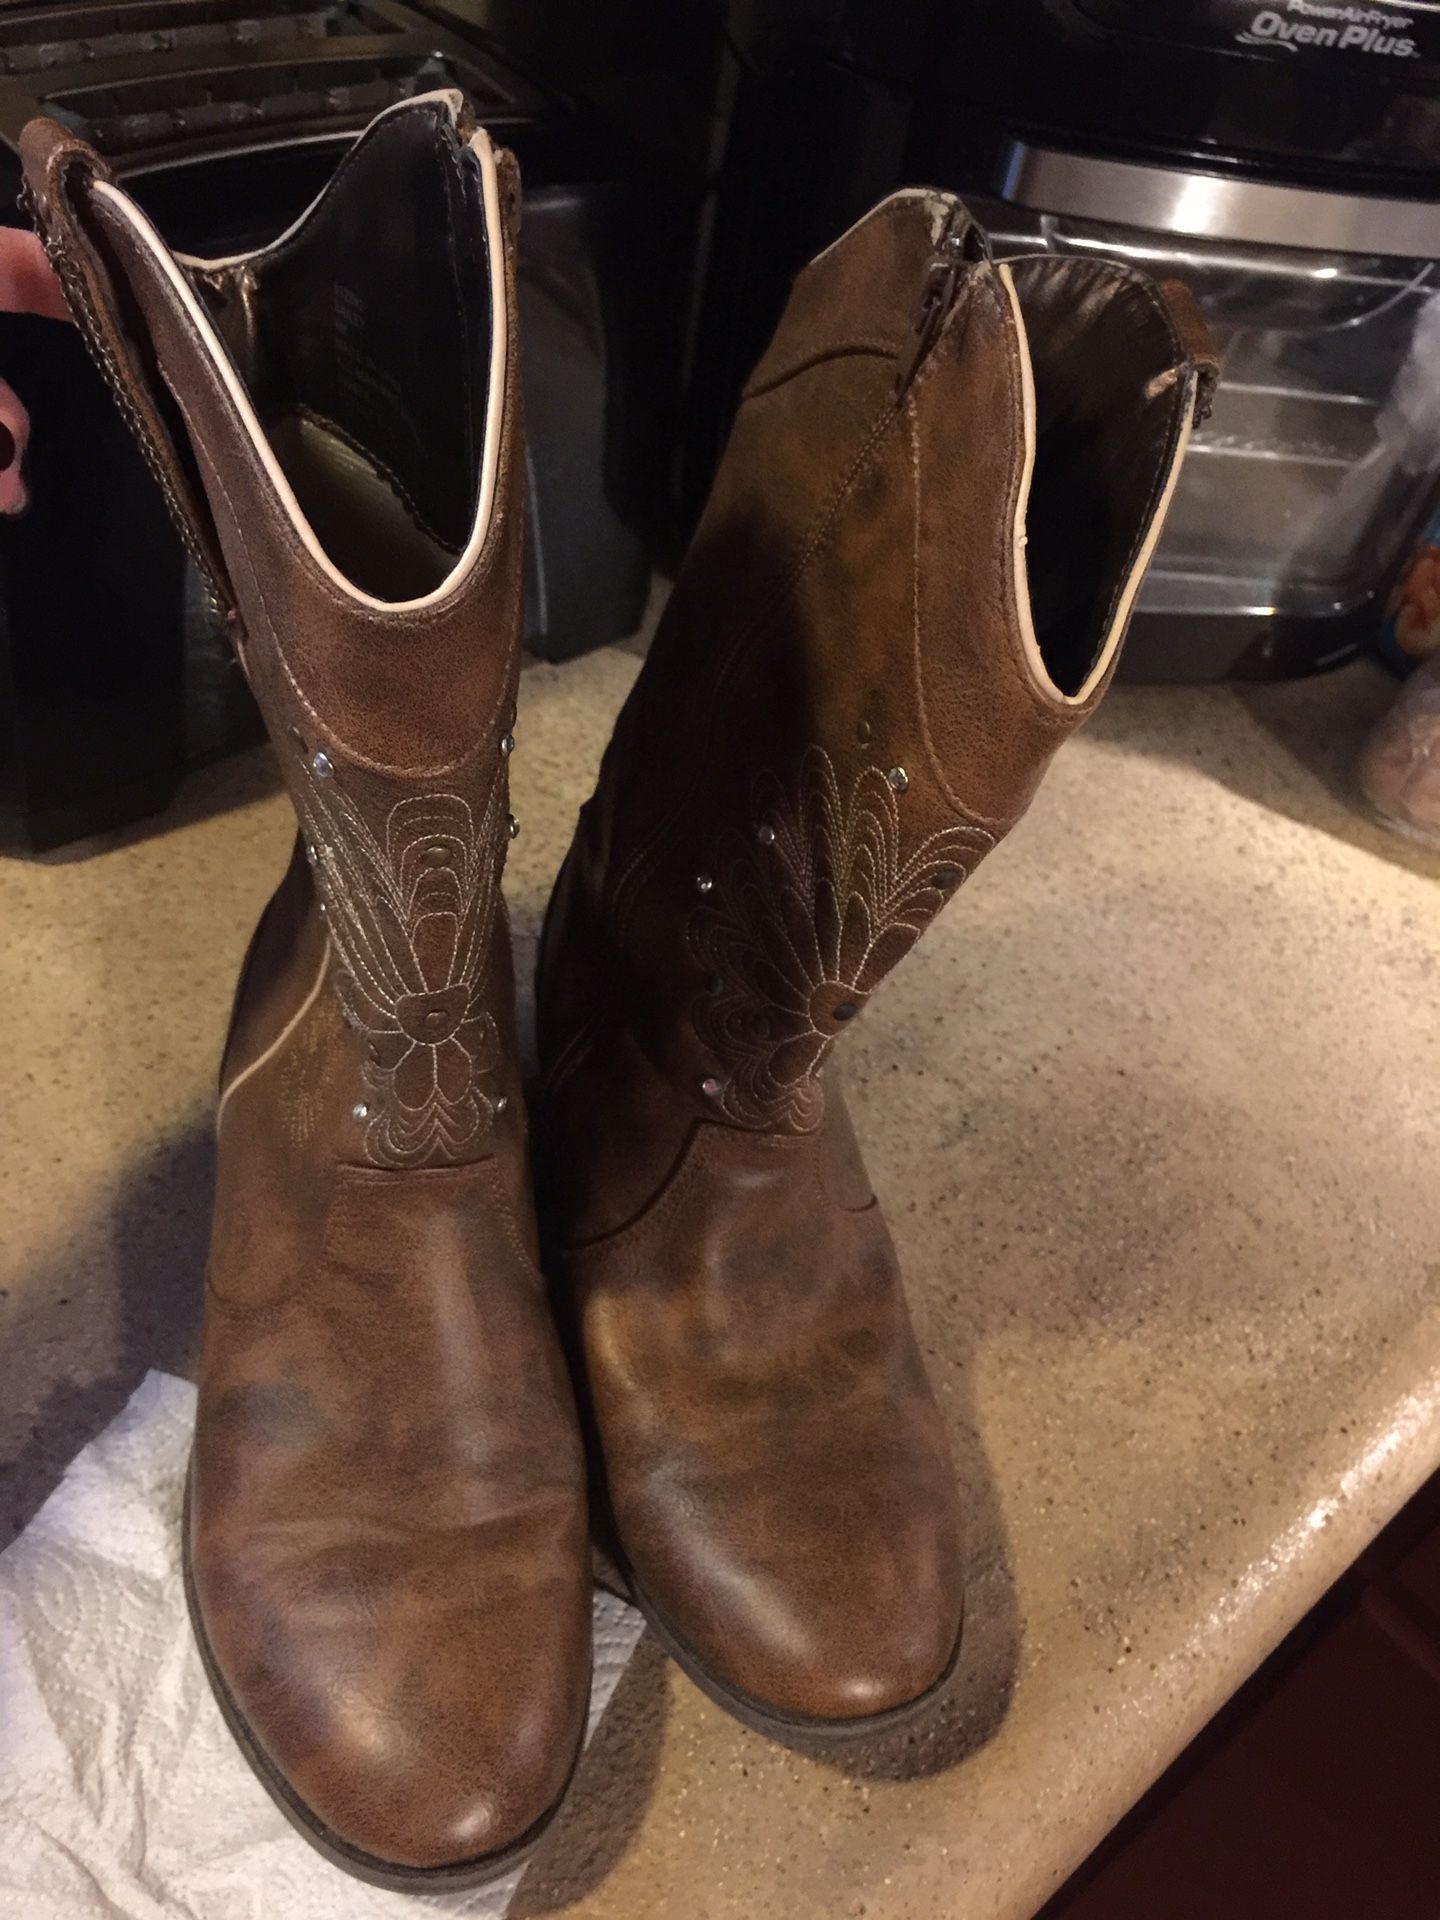 Girls size 4 boots